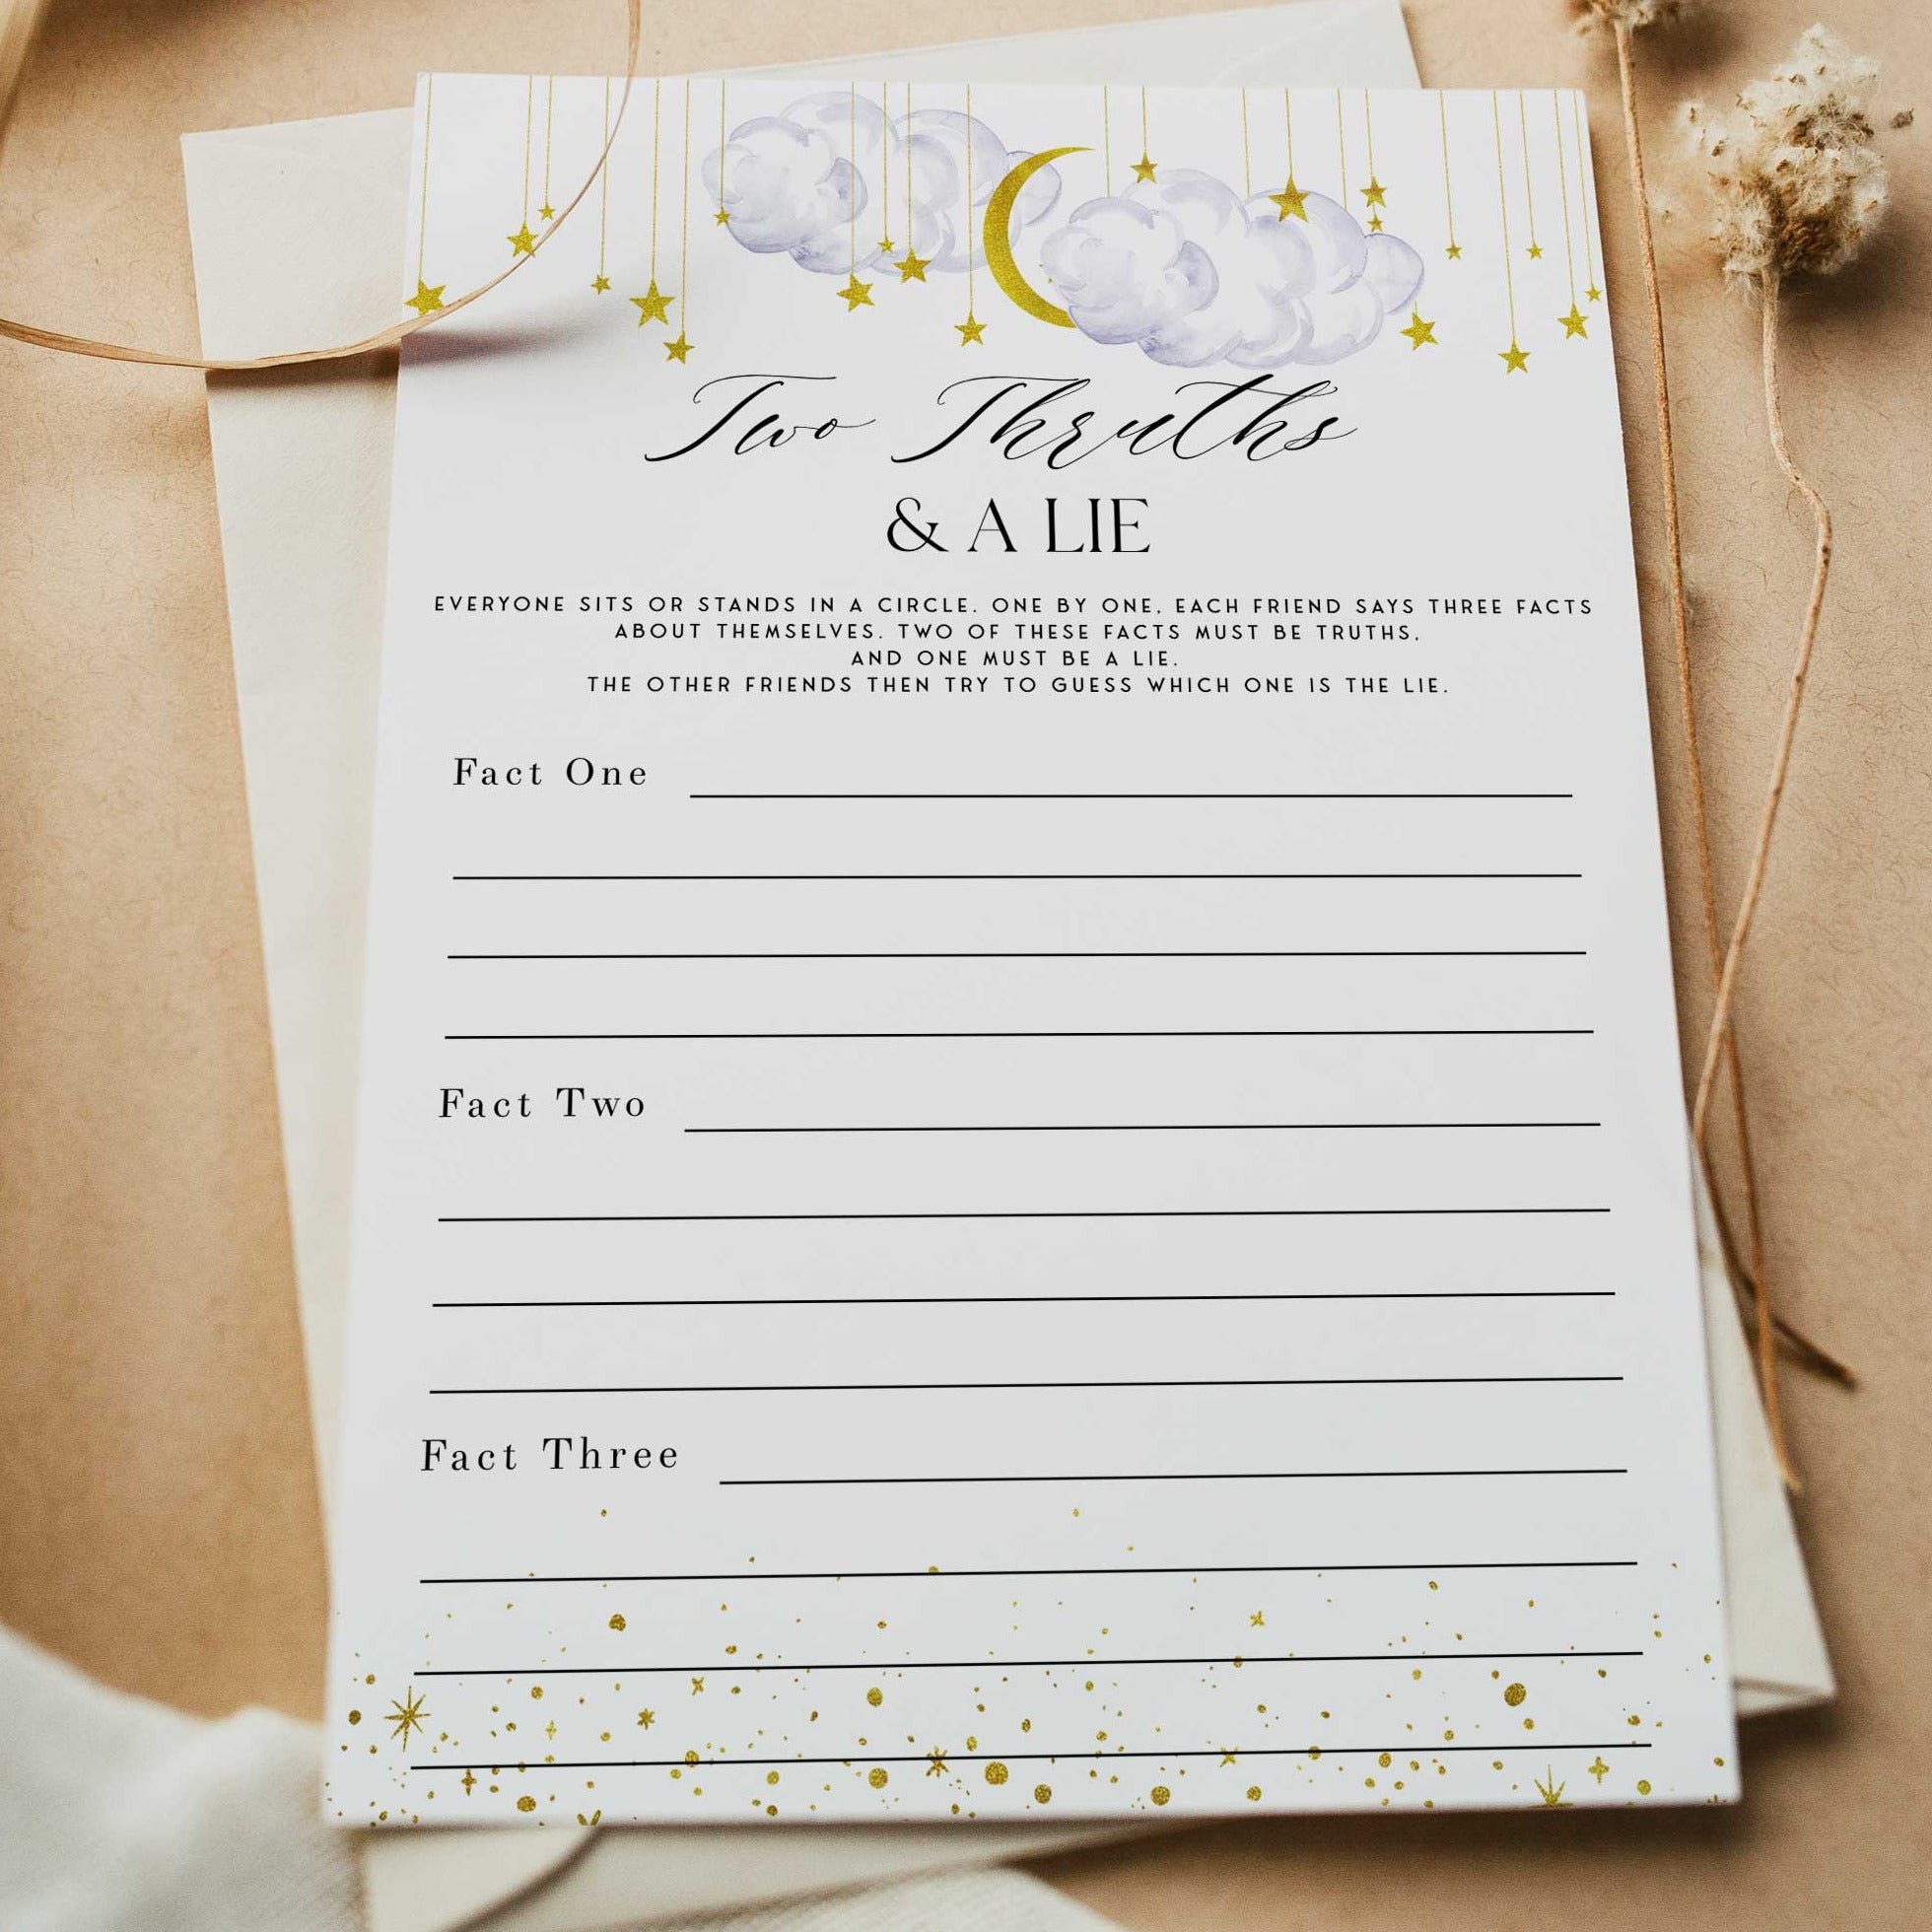 Fully editable and printable baby shower two truths and a lie game with a little star design. Perfect for a Twinkle Little Star baby shower themed party